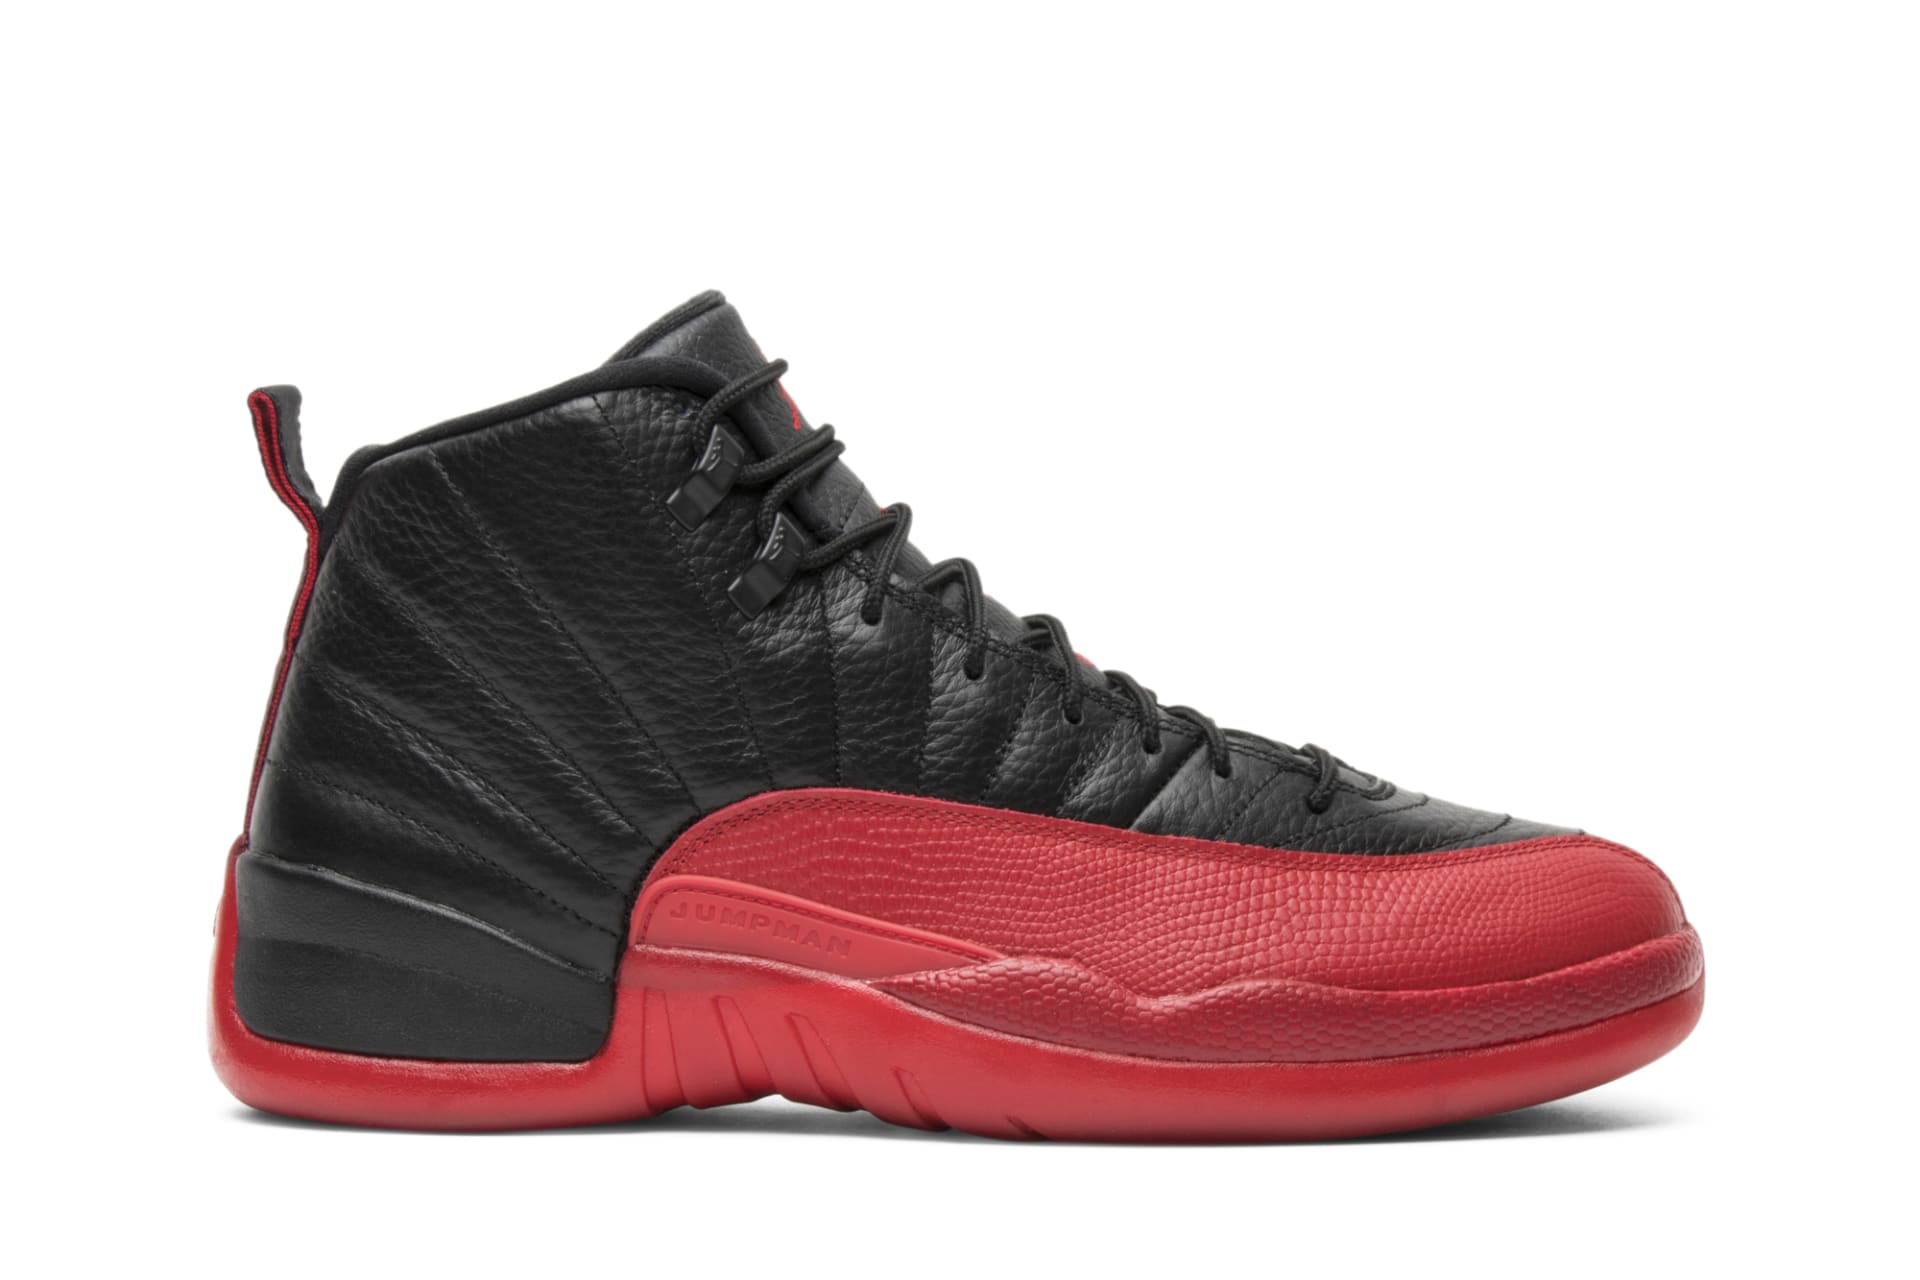 black and red jordans 12 release date